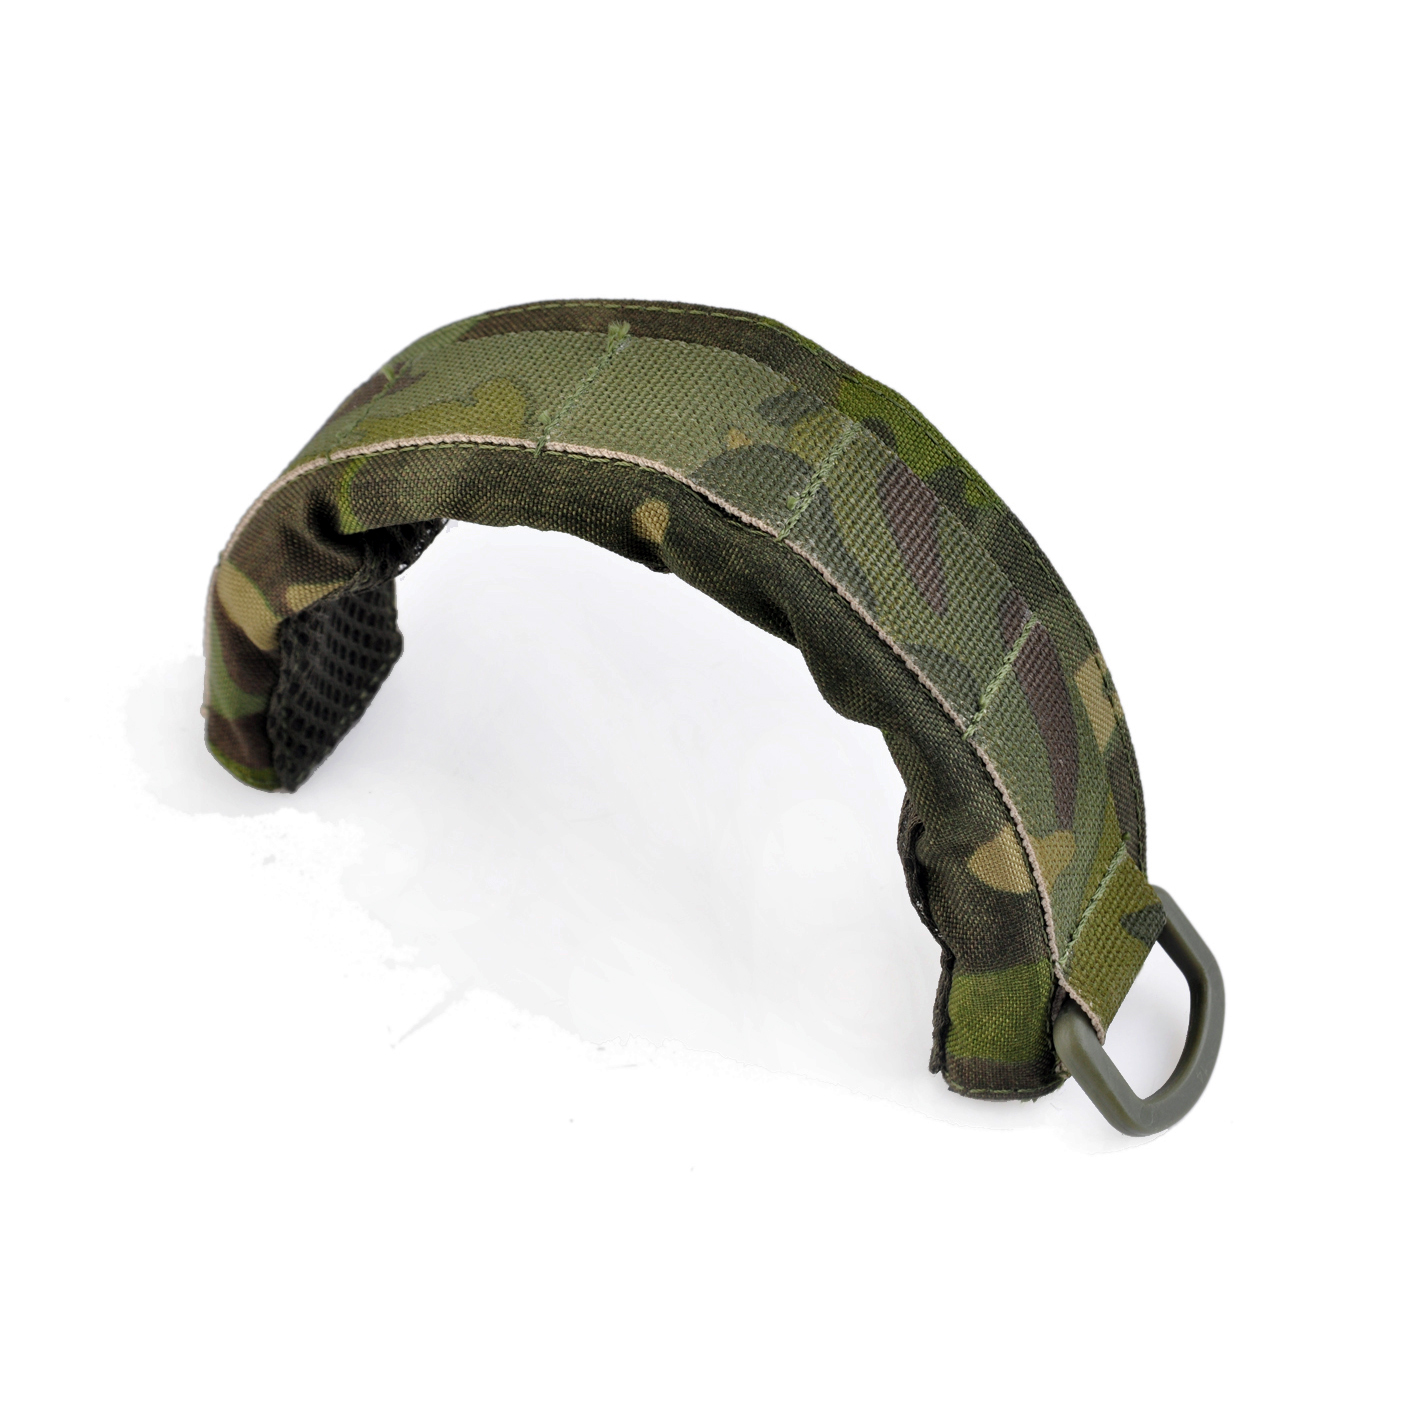 Opsmen - M61 Advanced Modular Headset Cover for M31/M32